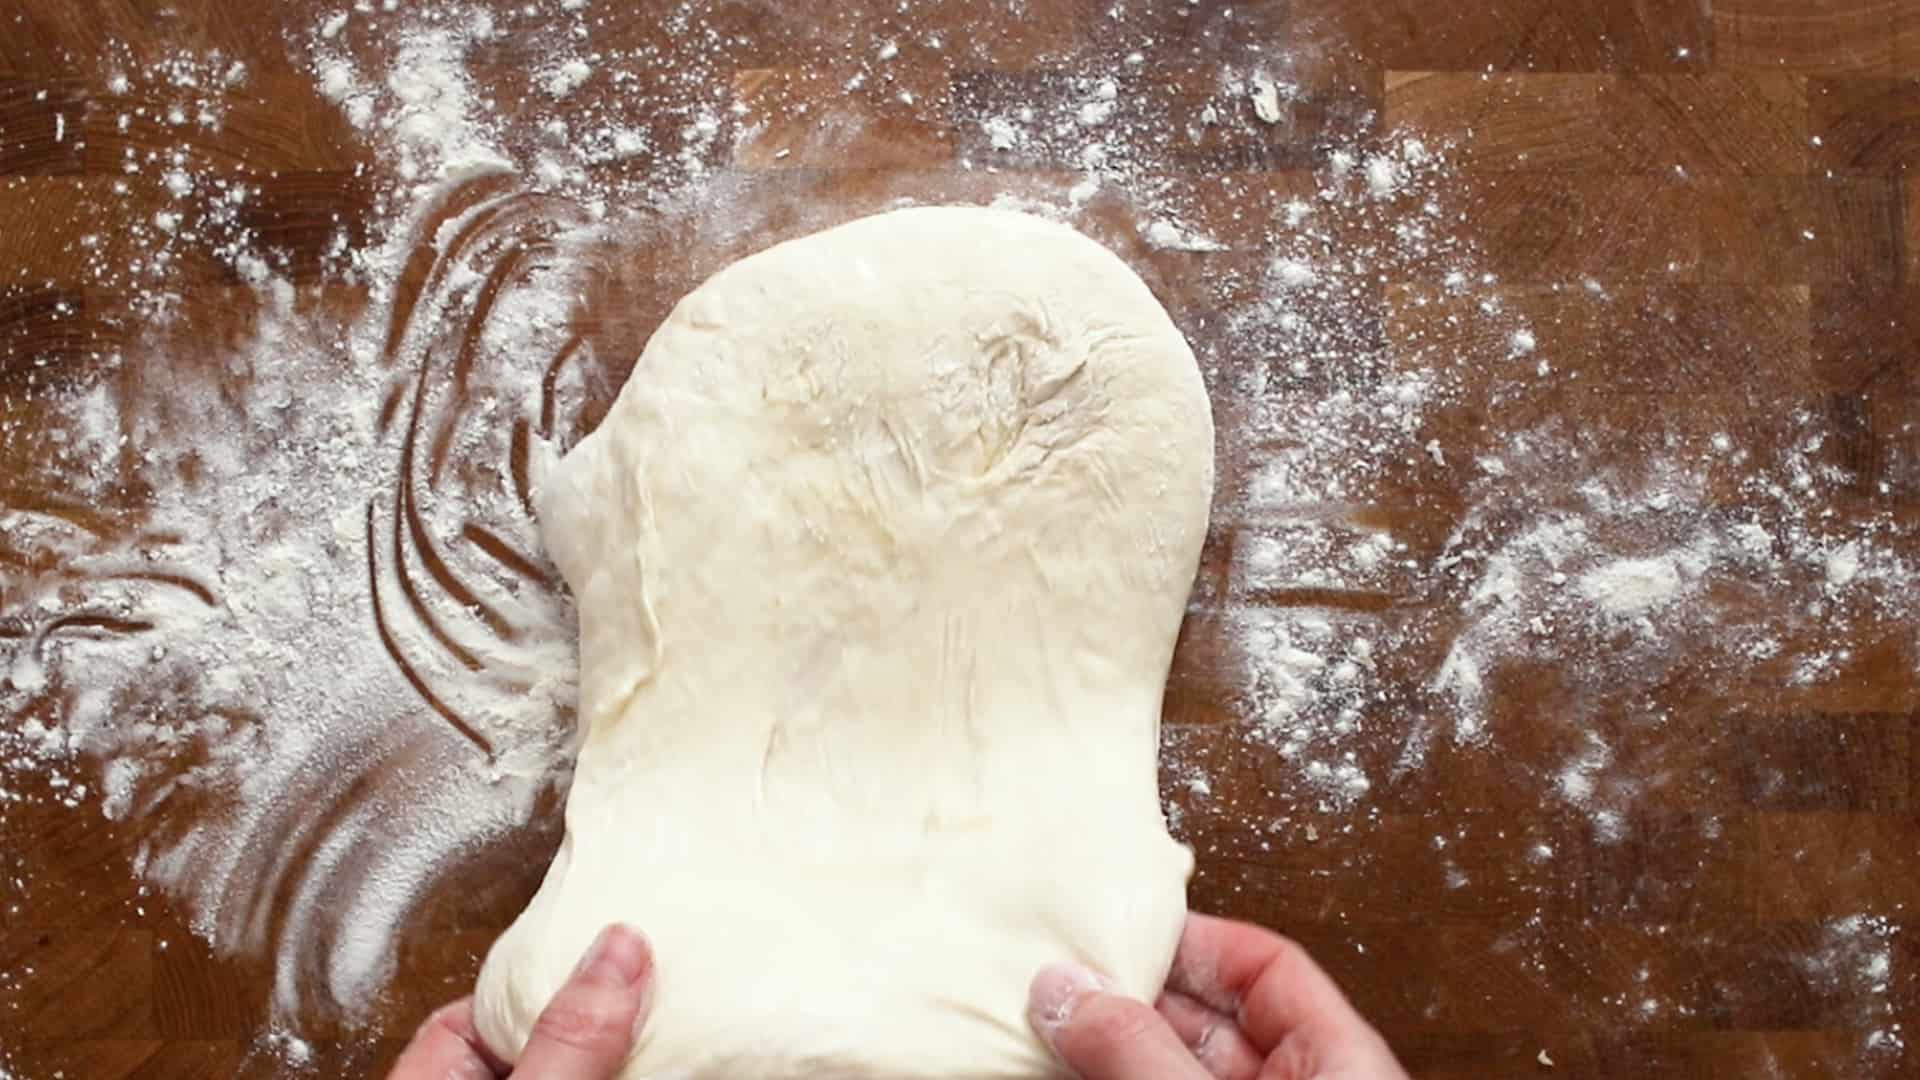 First stretch of the dough